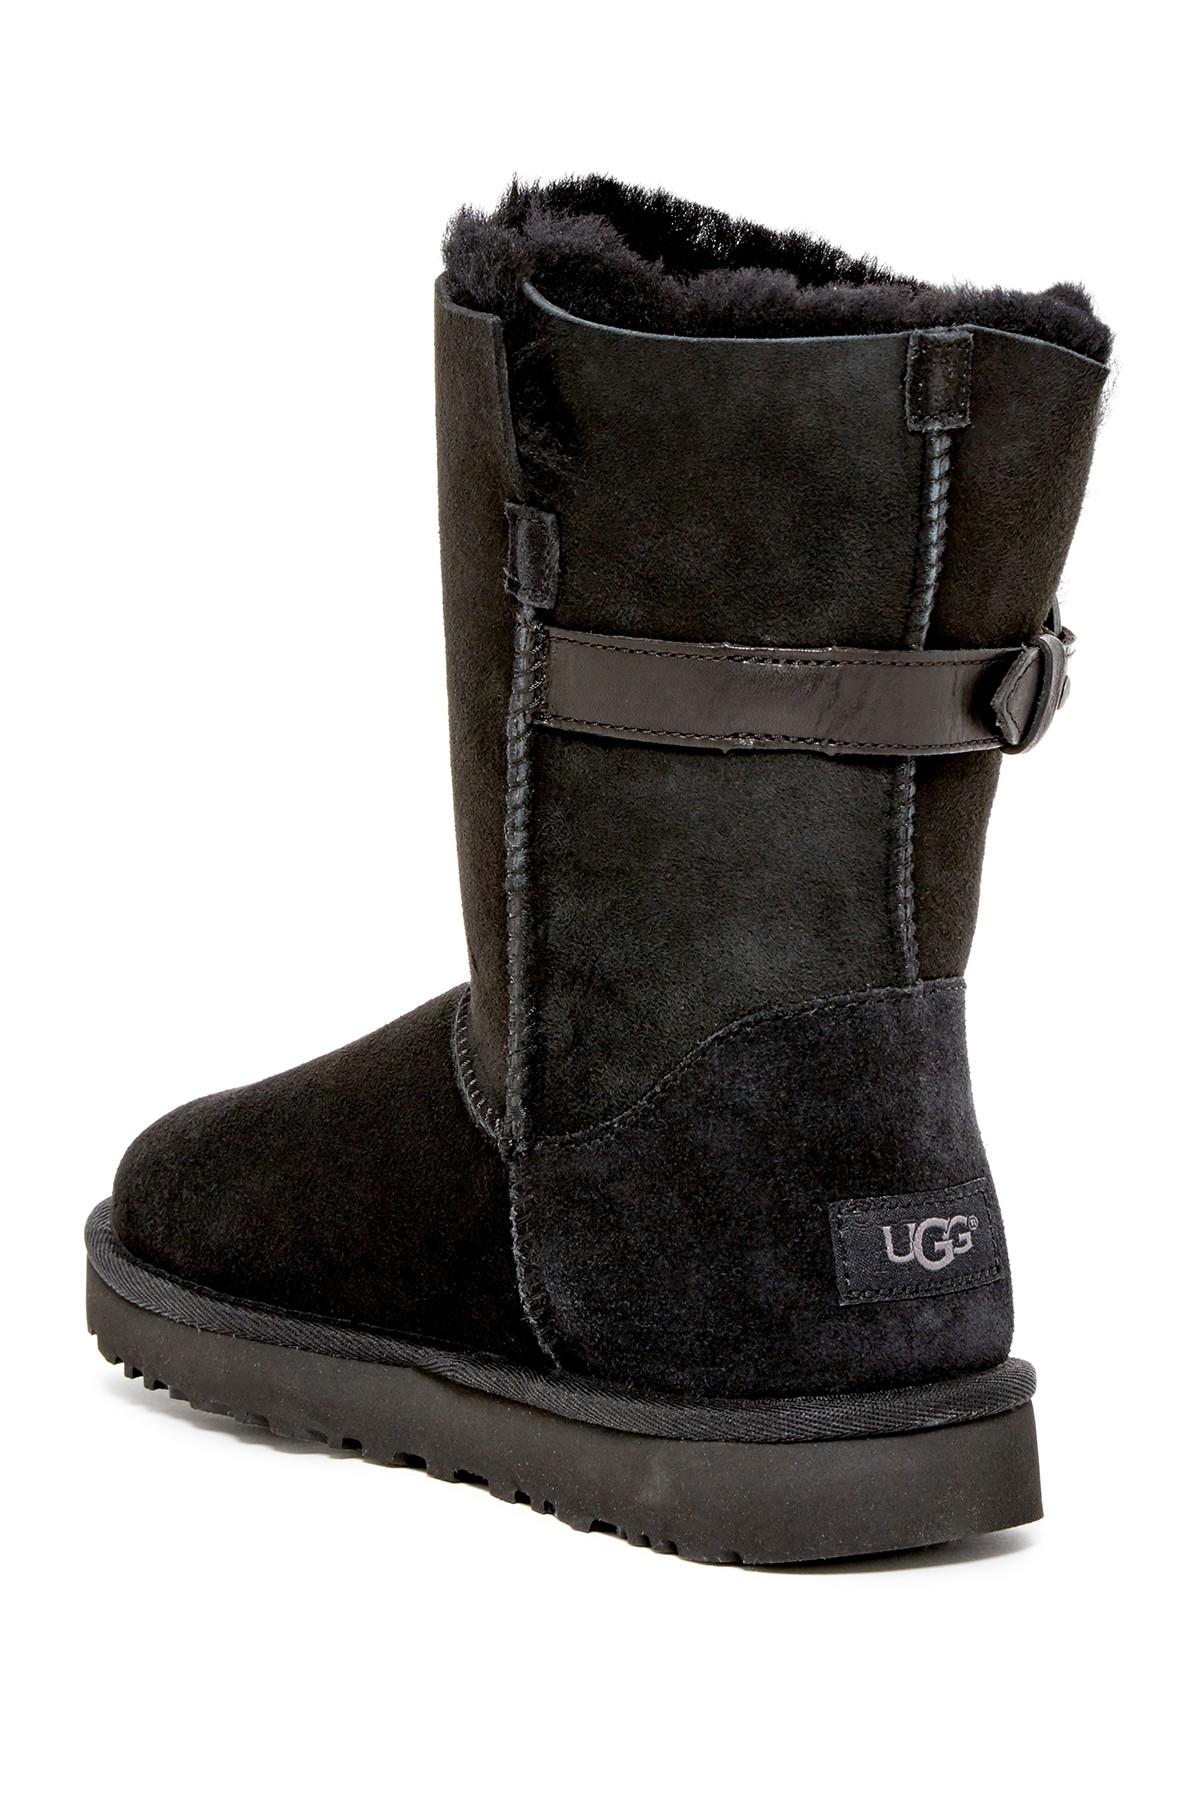 authentic ugg boots sale uk